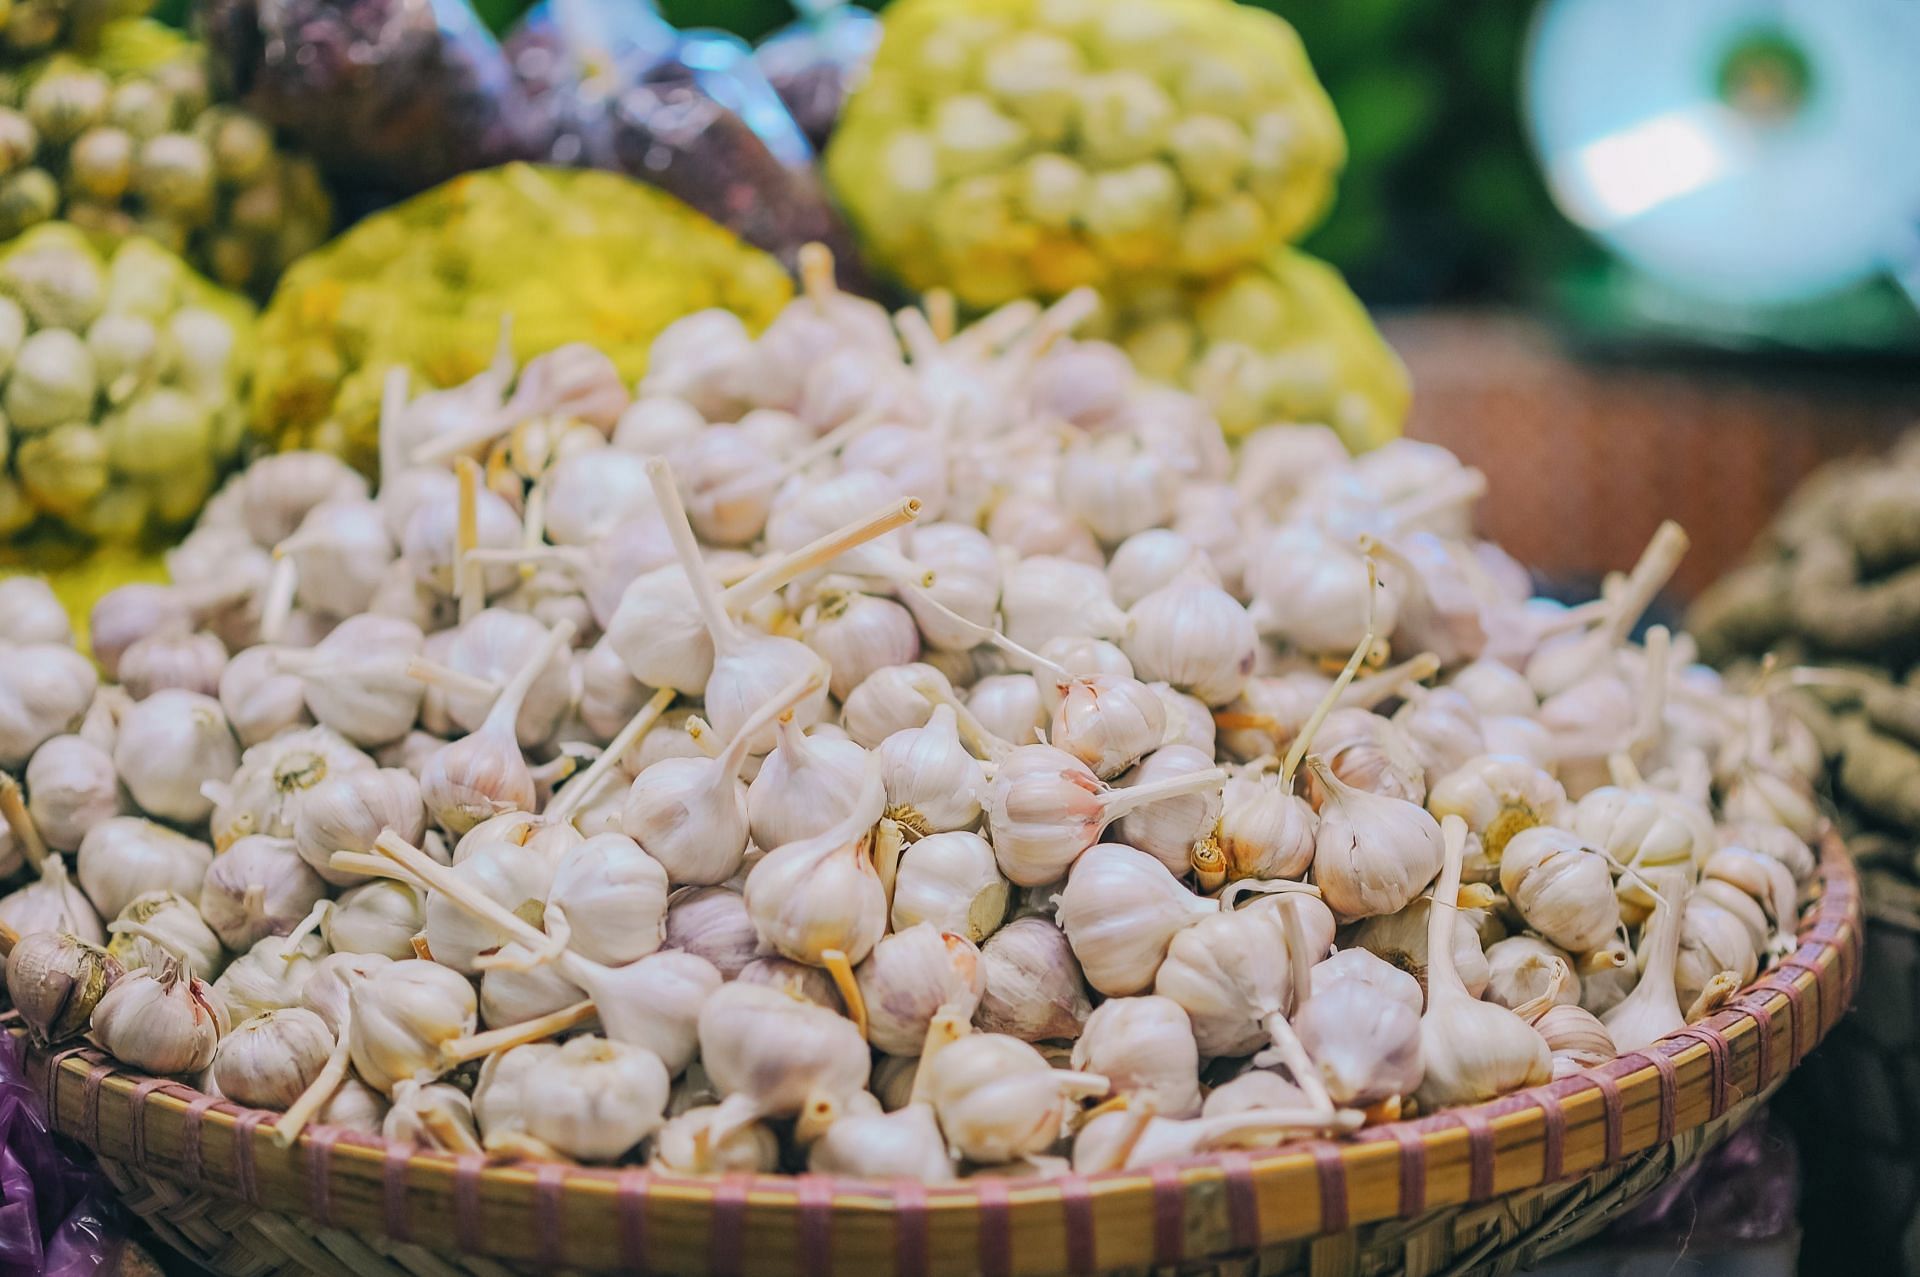 Garlic can be a tasty food ingredient but its smell lingers on (Image via Pexels/Min An)